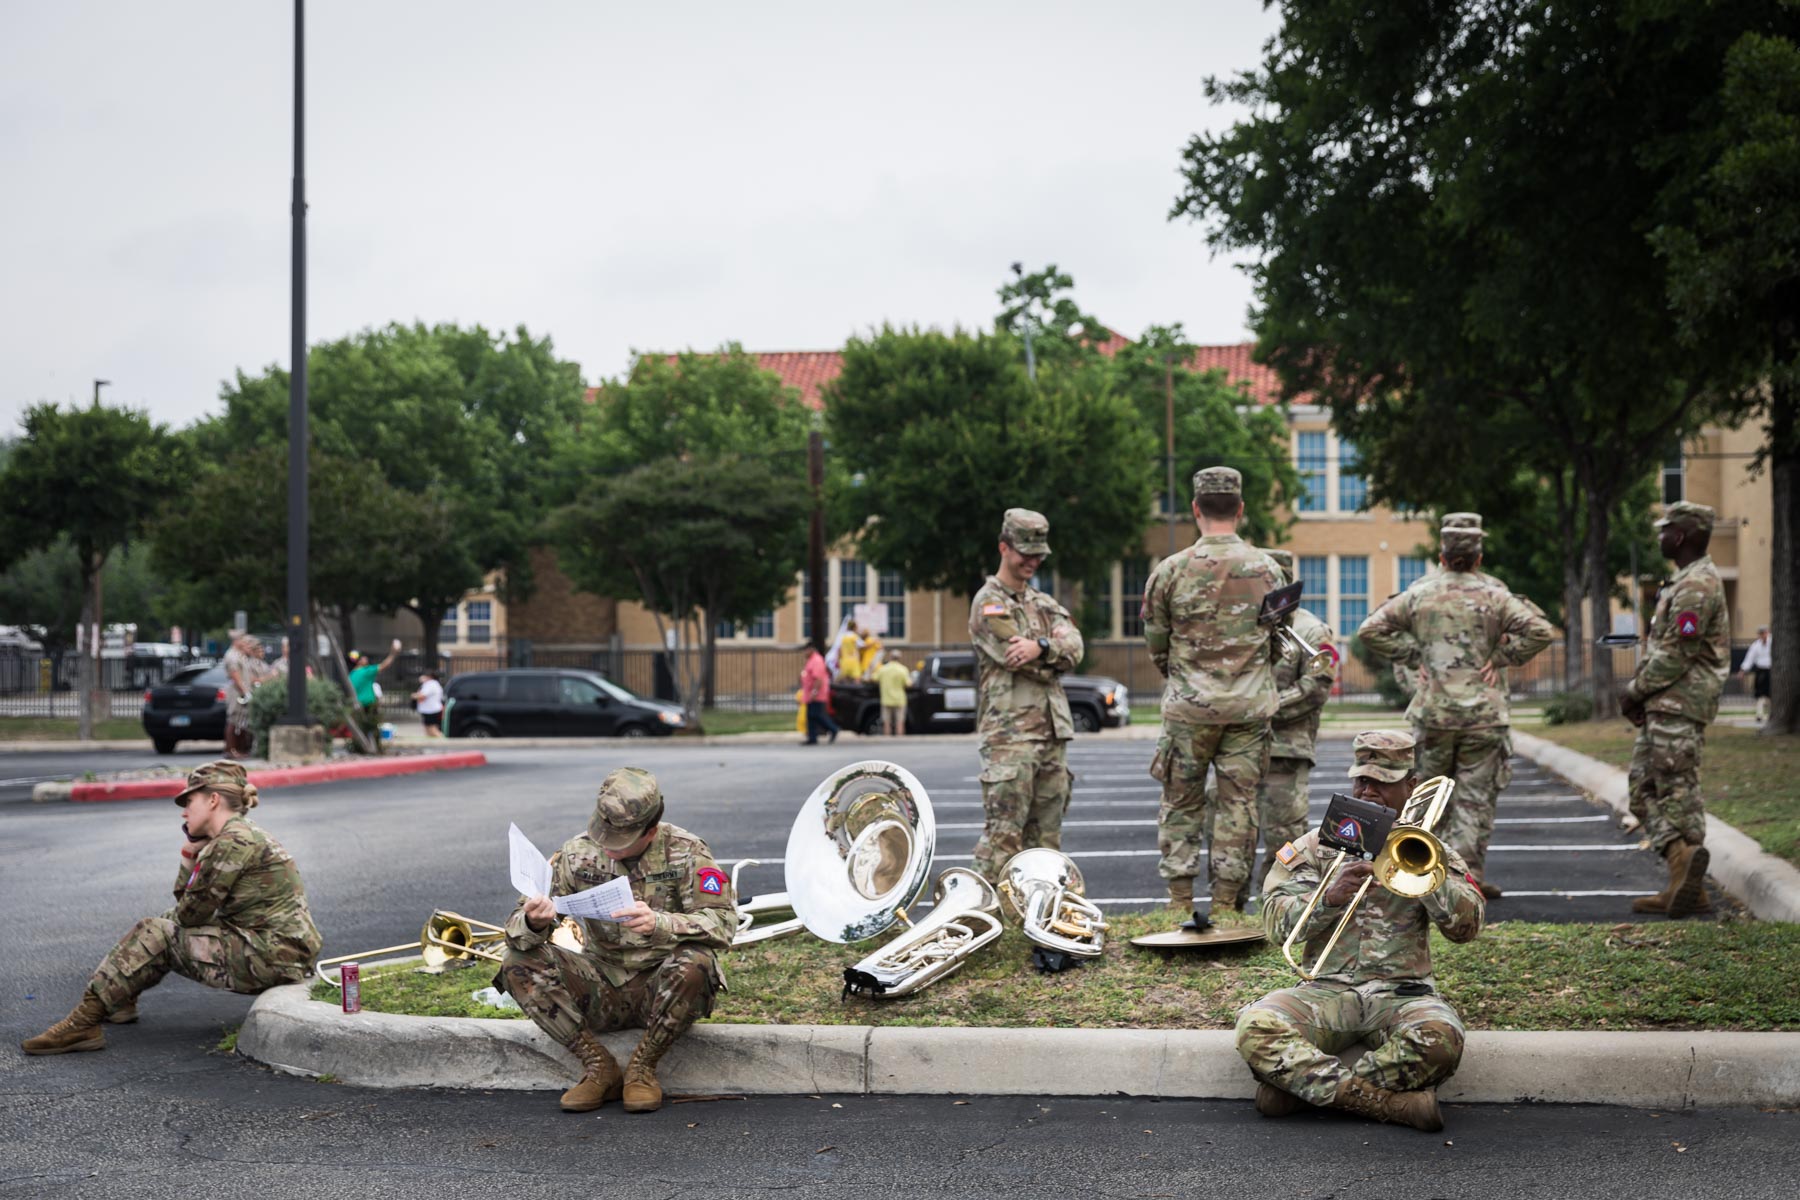 Military musicians in parking lot practicing instruments and talking on phone for an article on the Fiesta photo tips